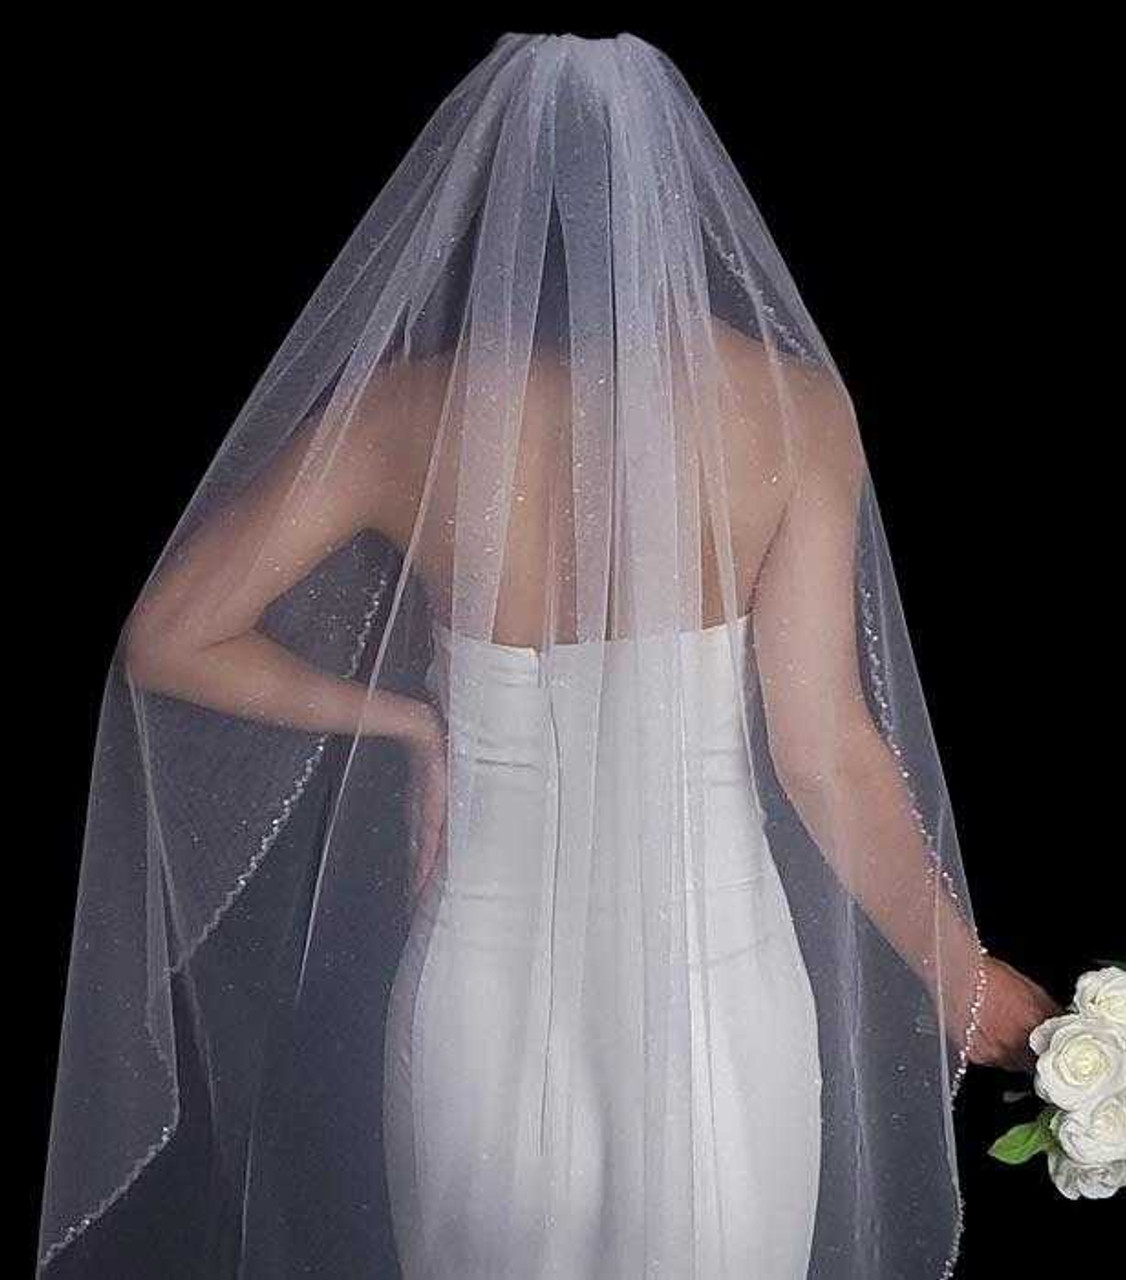 https://cdn11.bigcommerce.com/s-zb3qt33o/images/stencil/1280x1280/products/19223/64163/Clear-Crystal-Beaded-Edge-Sparkle-Tulle-Cathedral-Wedding-Veil_49068__06014.1697570952.jpg?c=2